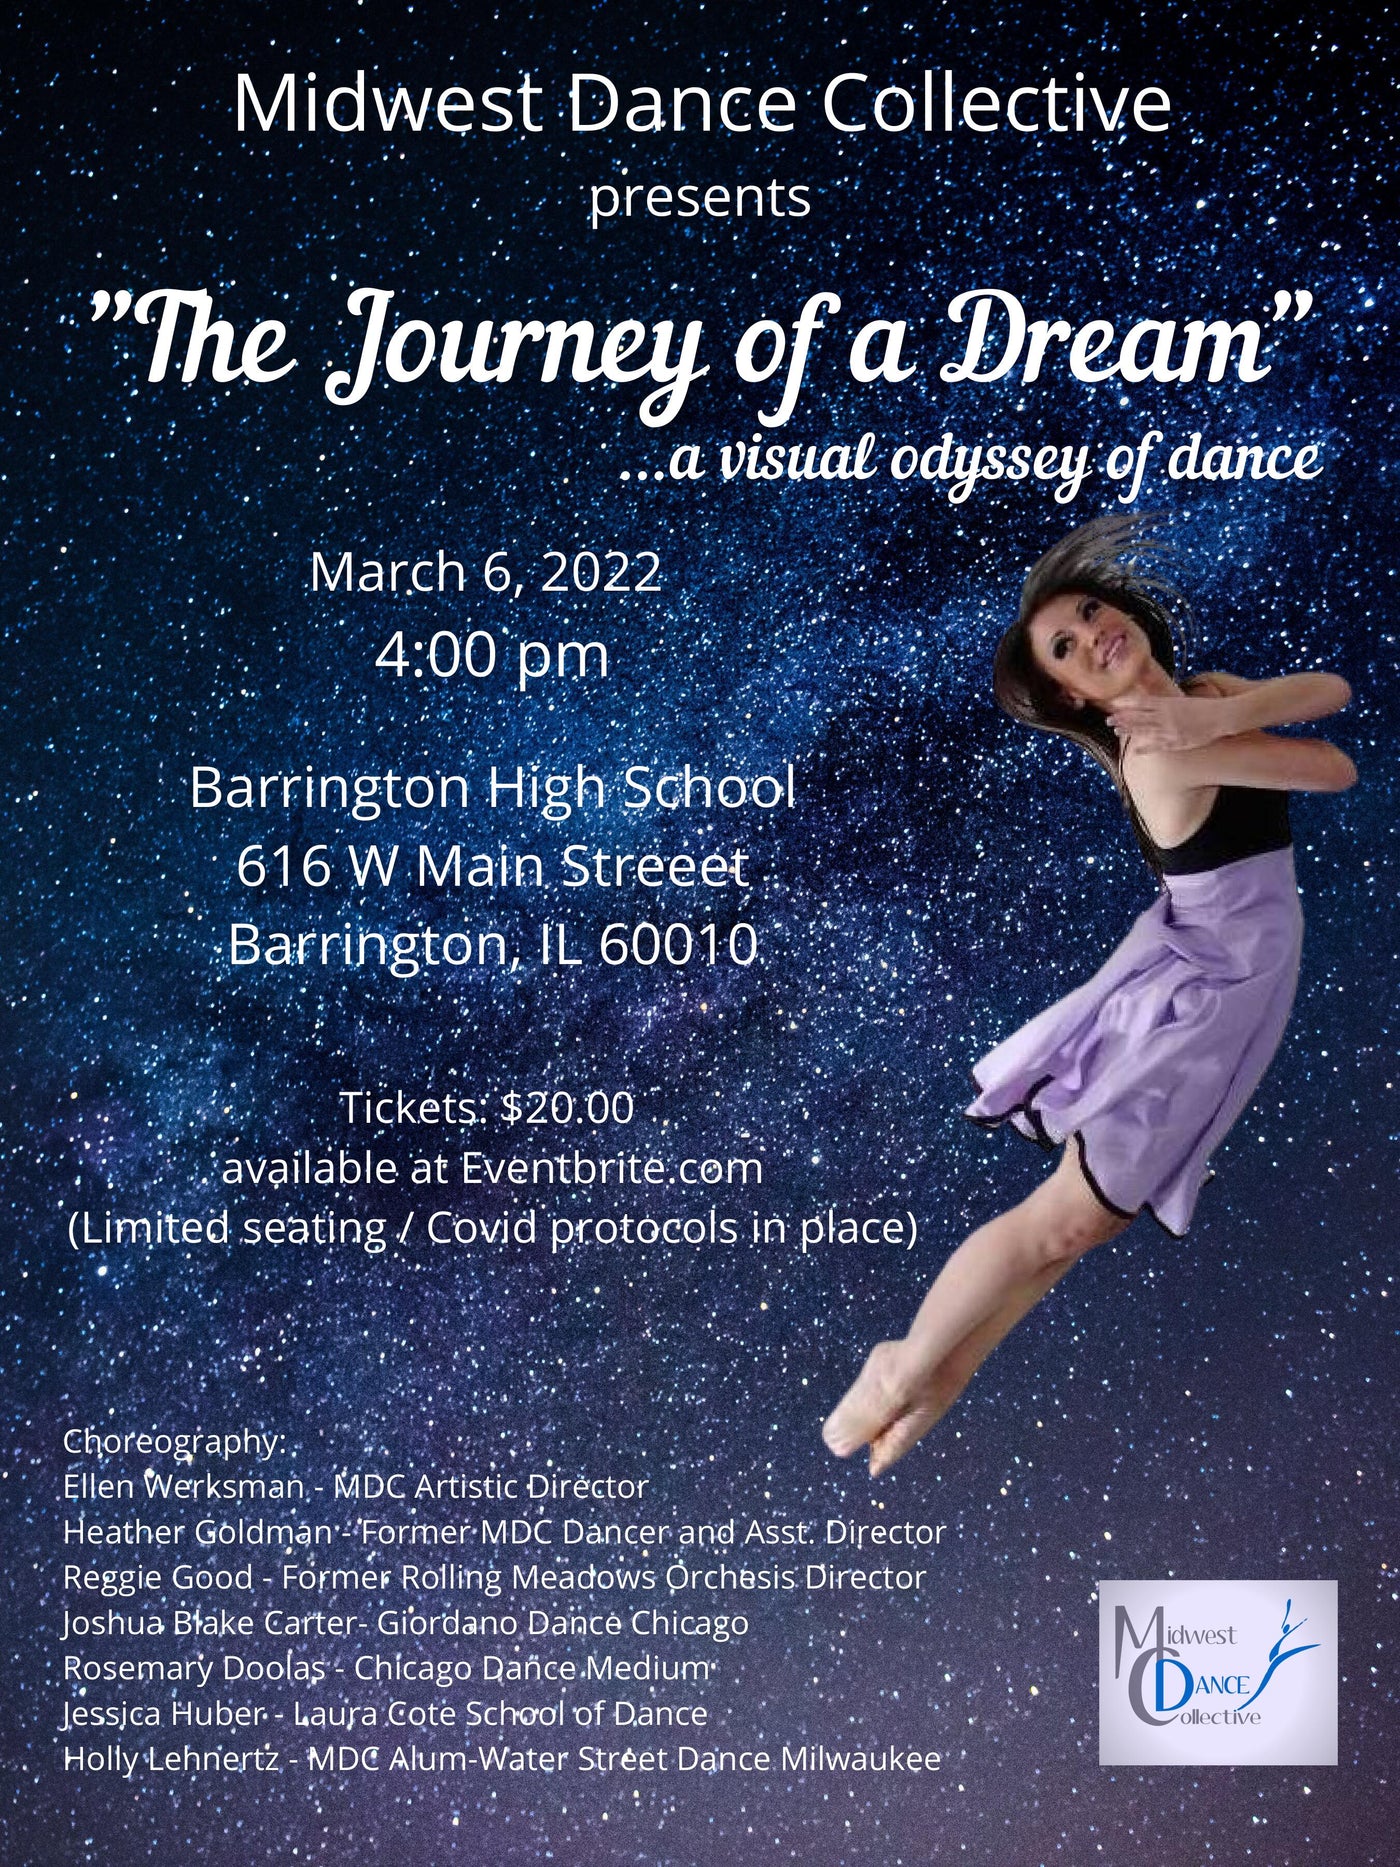 MDC "The Journey Of A Dream"